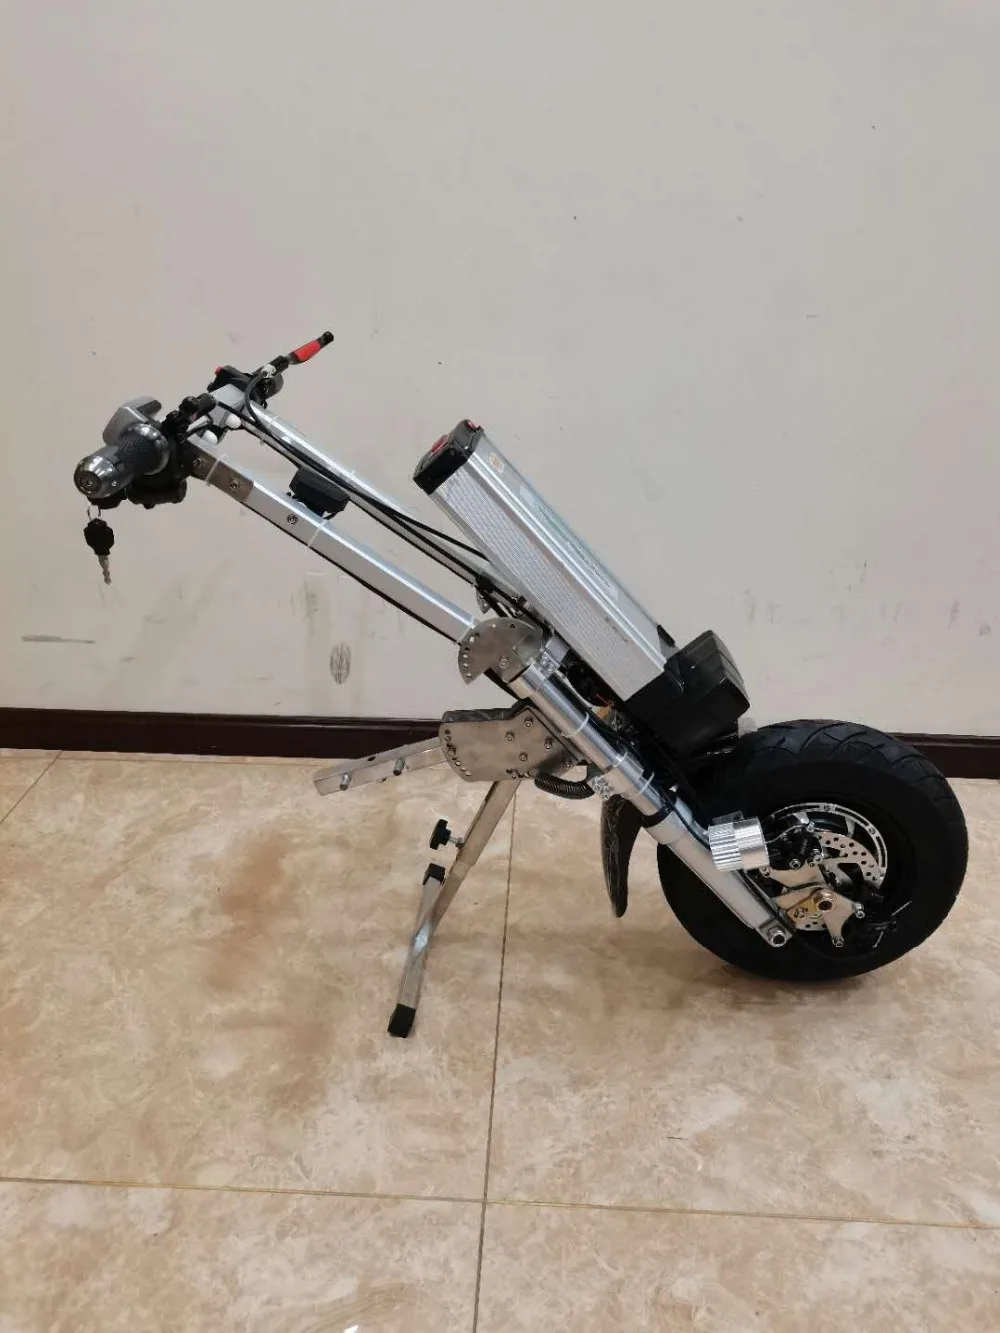 

Hot Sell Fashion Cool 500W Handcycle Wheelchair Units Electric Handbike Wheelchair Trailer,Safe And Convenient